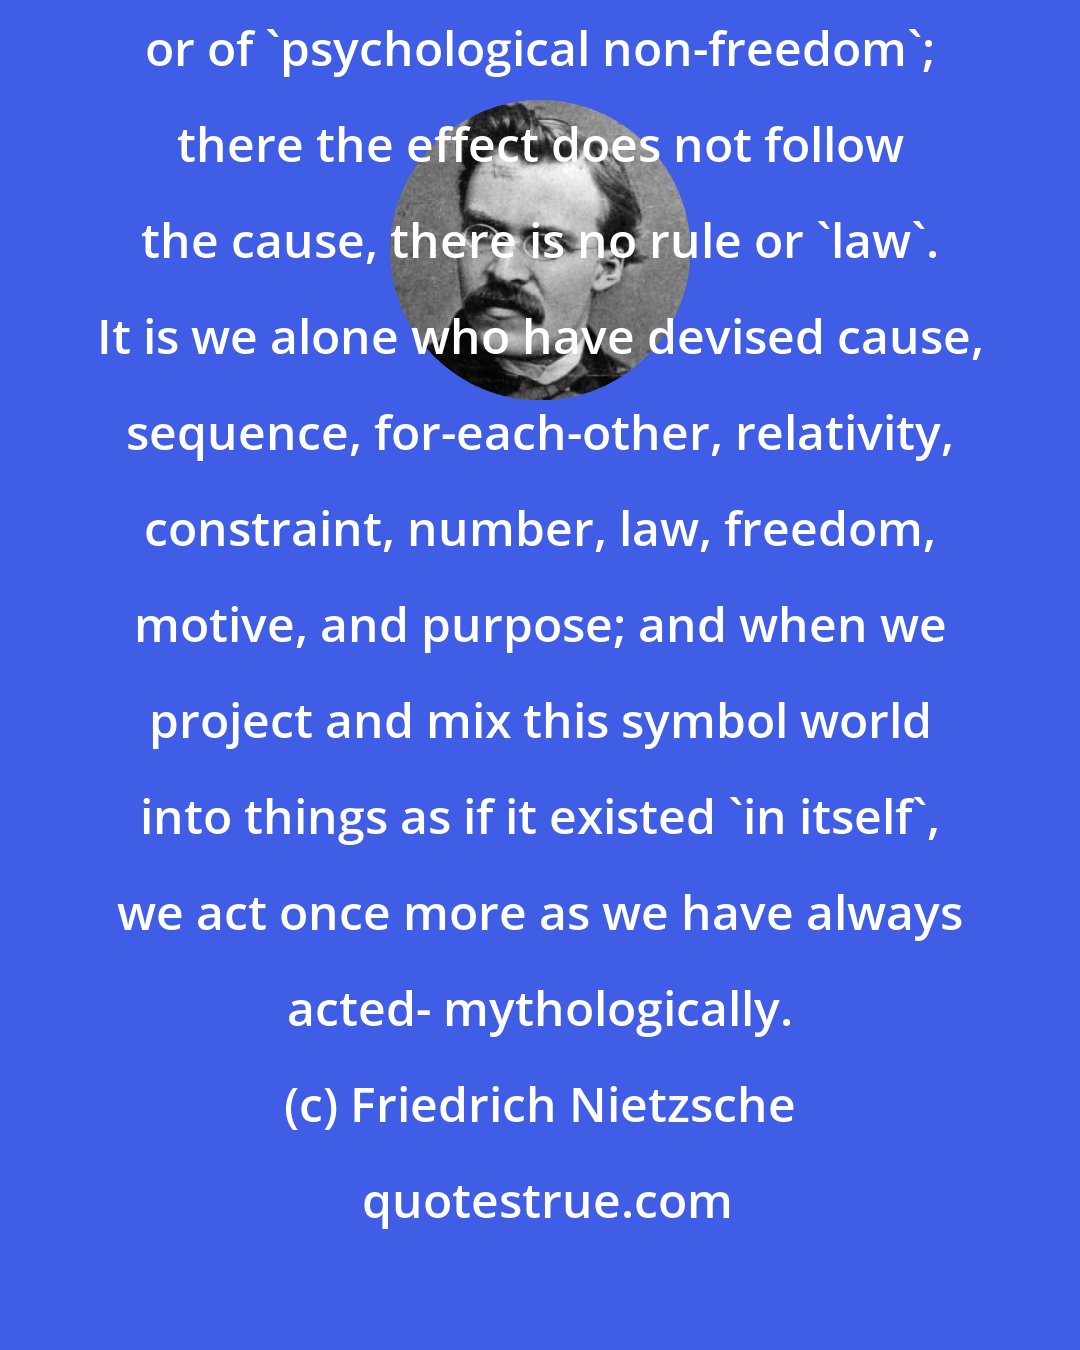 Friedrich Nietzsche: In the 'in-itself' there is nothing of 'causal connections', of 'necessity', or of 'psychological non-freedom'; there the effect does not follow the cause, there is no rule or 'law'. It is we alone who have devised cause, sequence, for-each-other, relativity, constraint, number, law, freedom, motive, and purpose; and when we project and mix this symbol world into things as if it existed 'in itself', we act once more as we have always acted- mythologically.